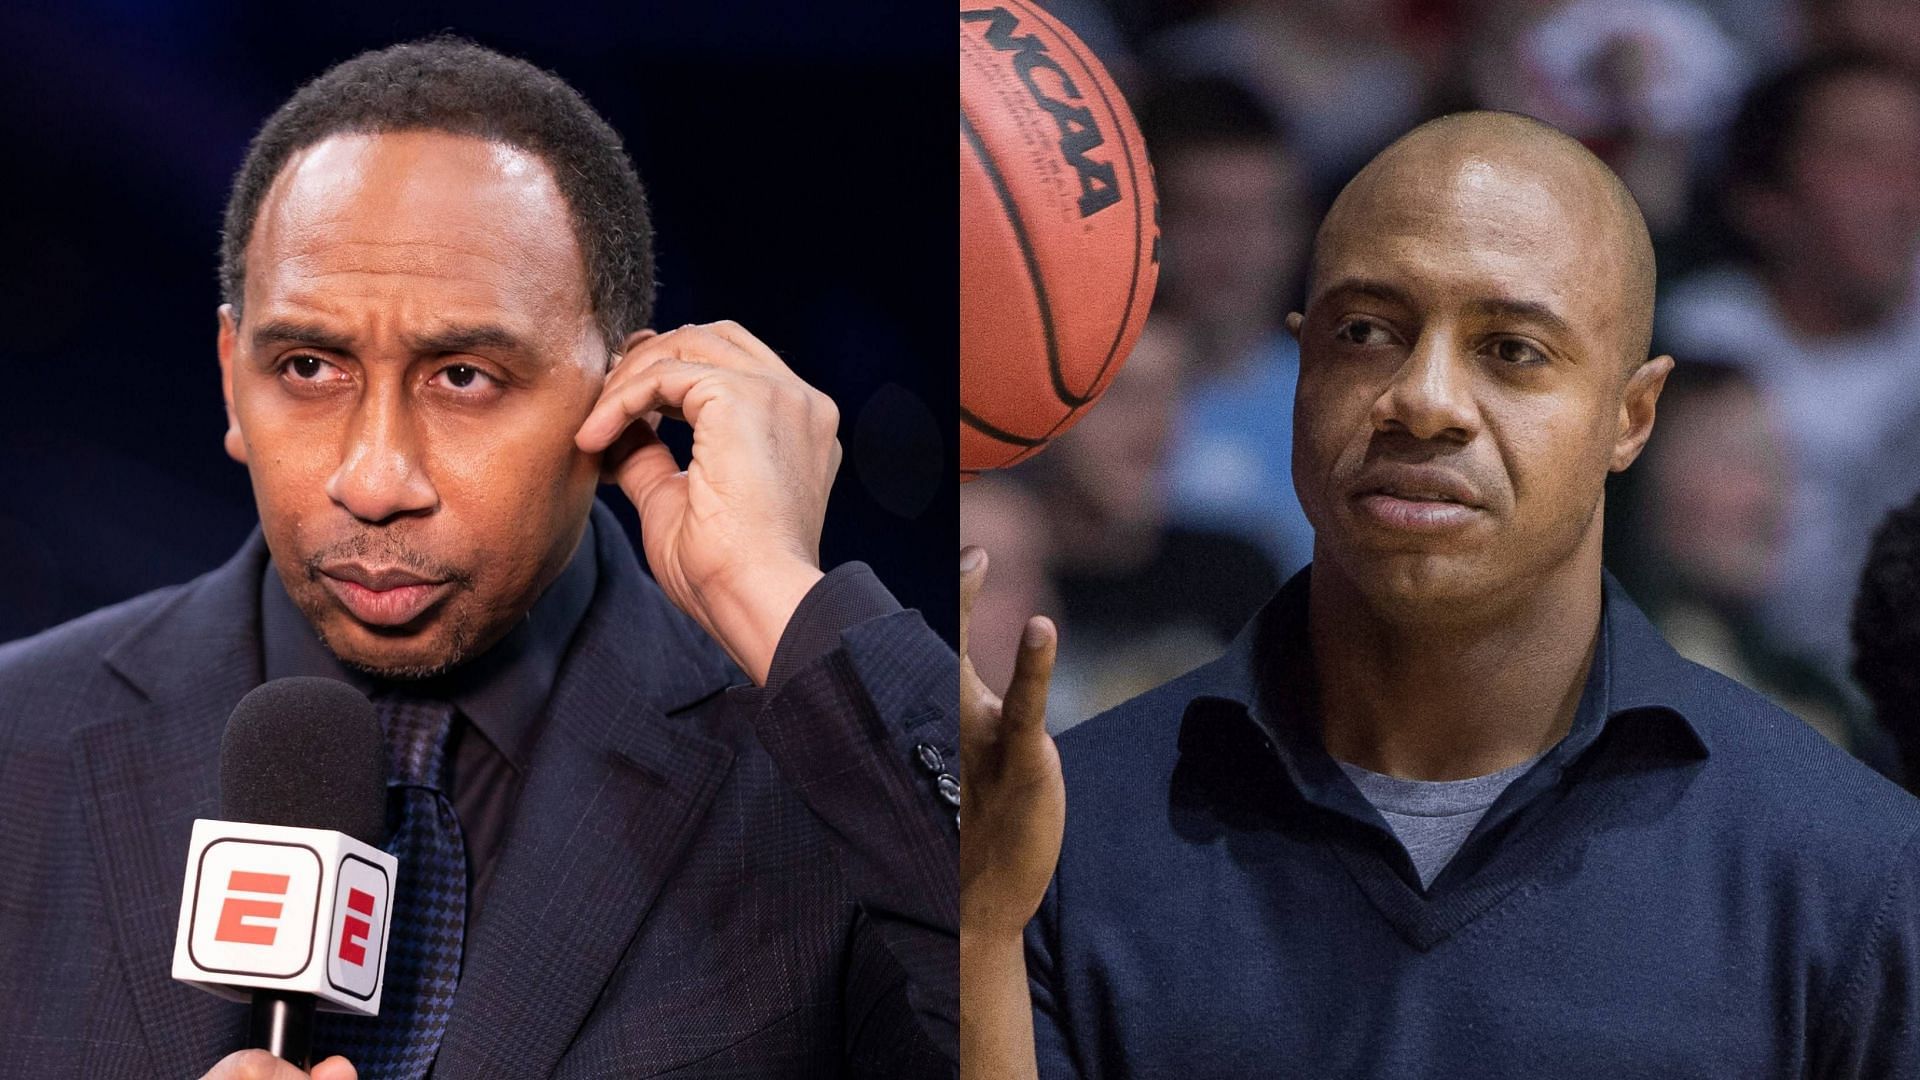 ESPN analysts Stephen A. Smith and Jay Williams